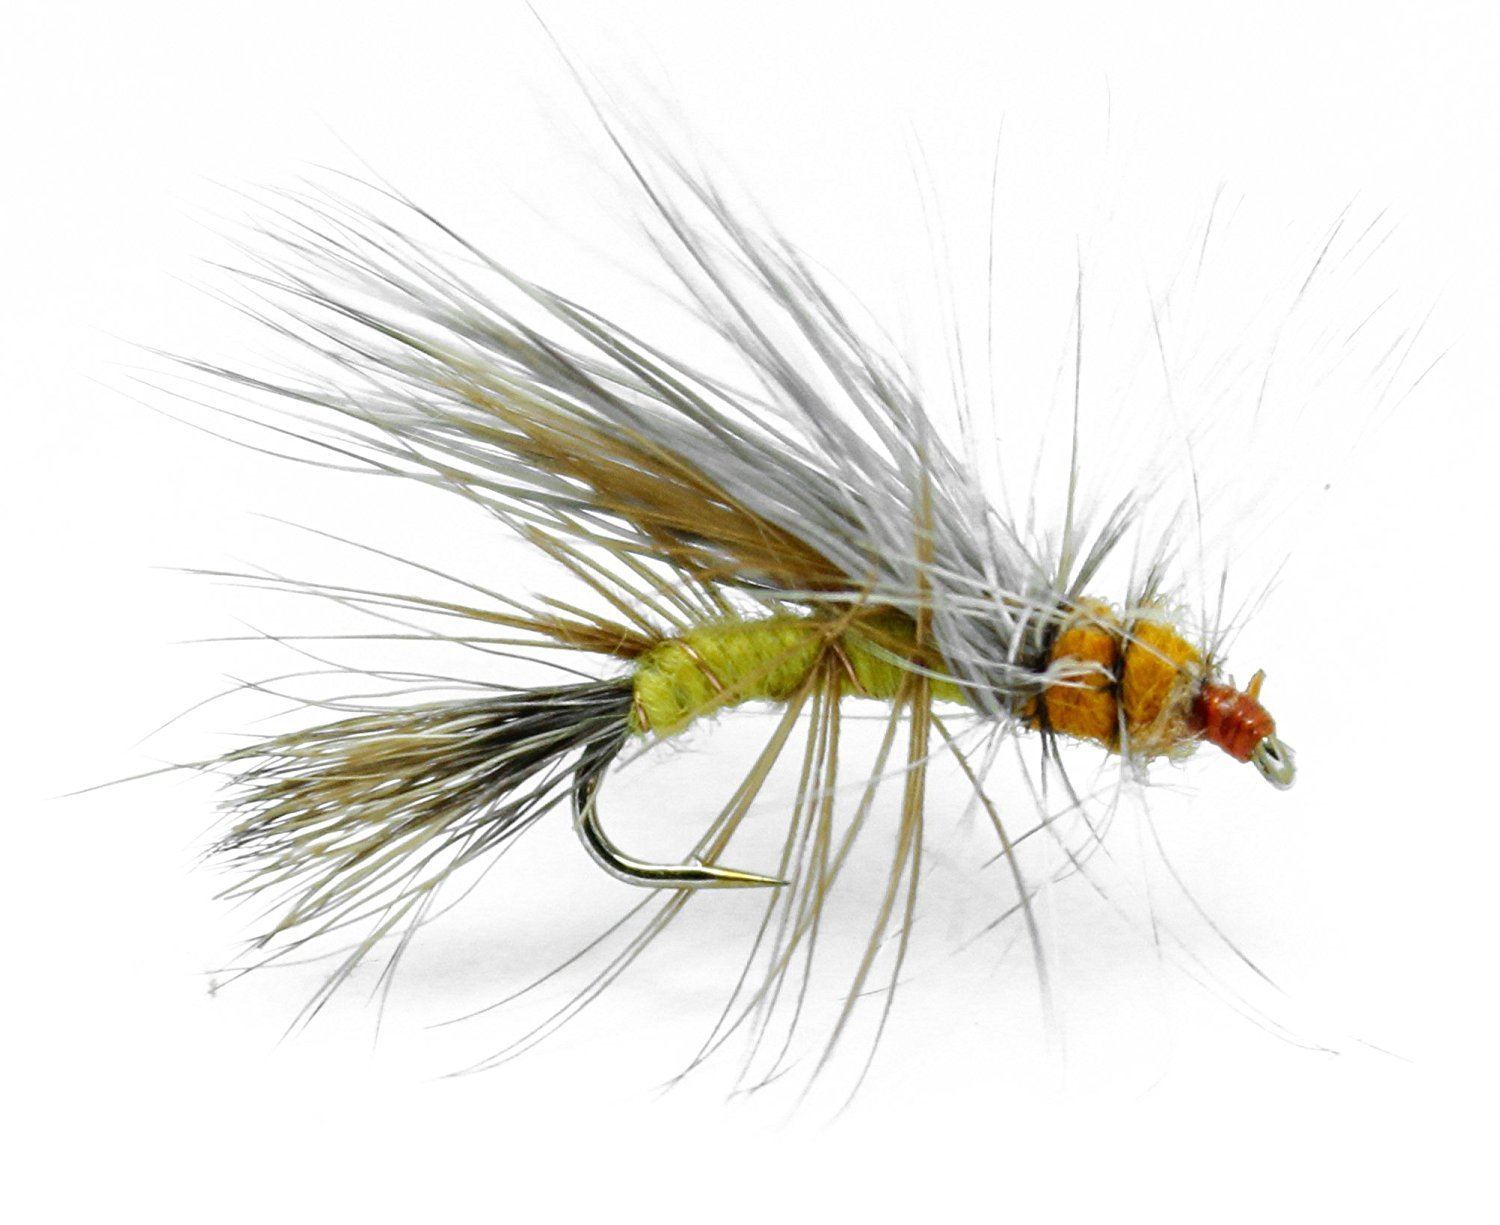 Feeder Creek Fly Fishing Trout Flies - Trout Crushing Dry Fly Assortment - 72 Dry Flies in 12 Patterns